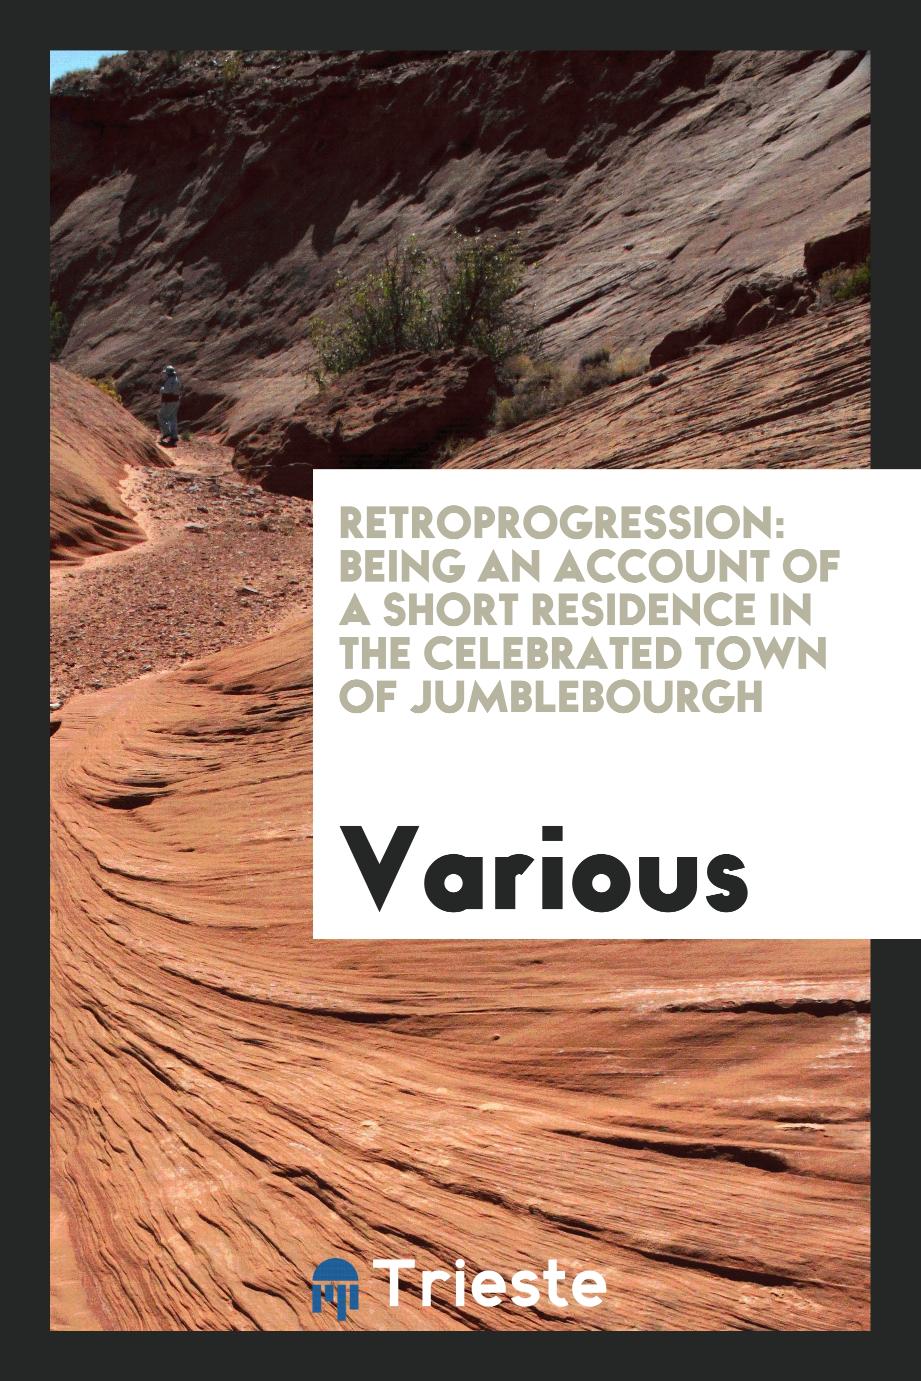 Retroprogression: Being an Account of a Short Residence in the Celebrated town of Jumblebourgh